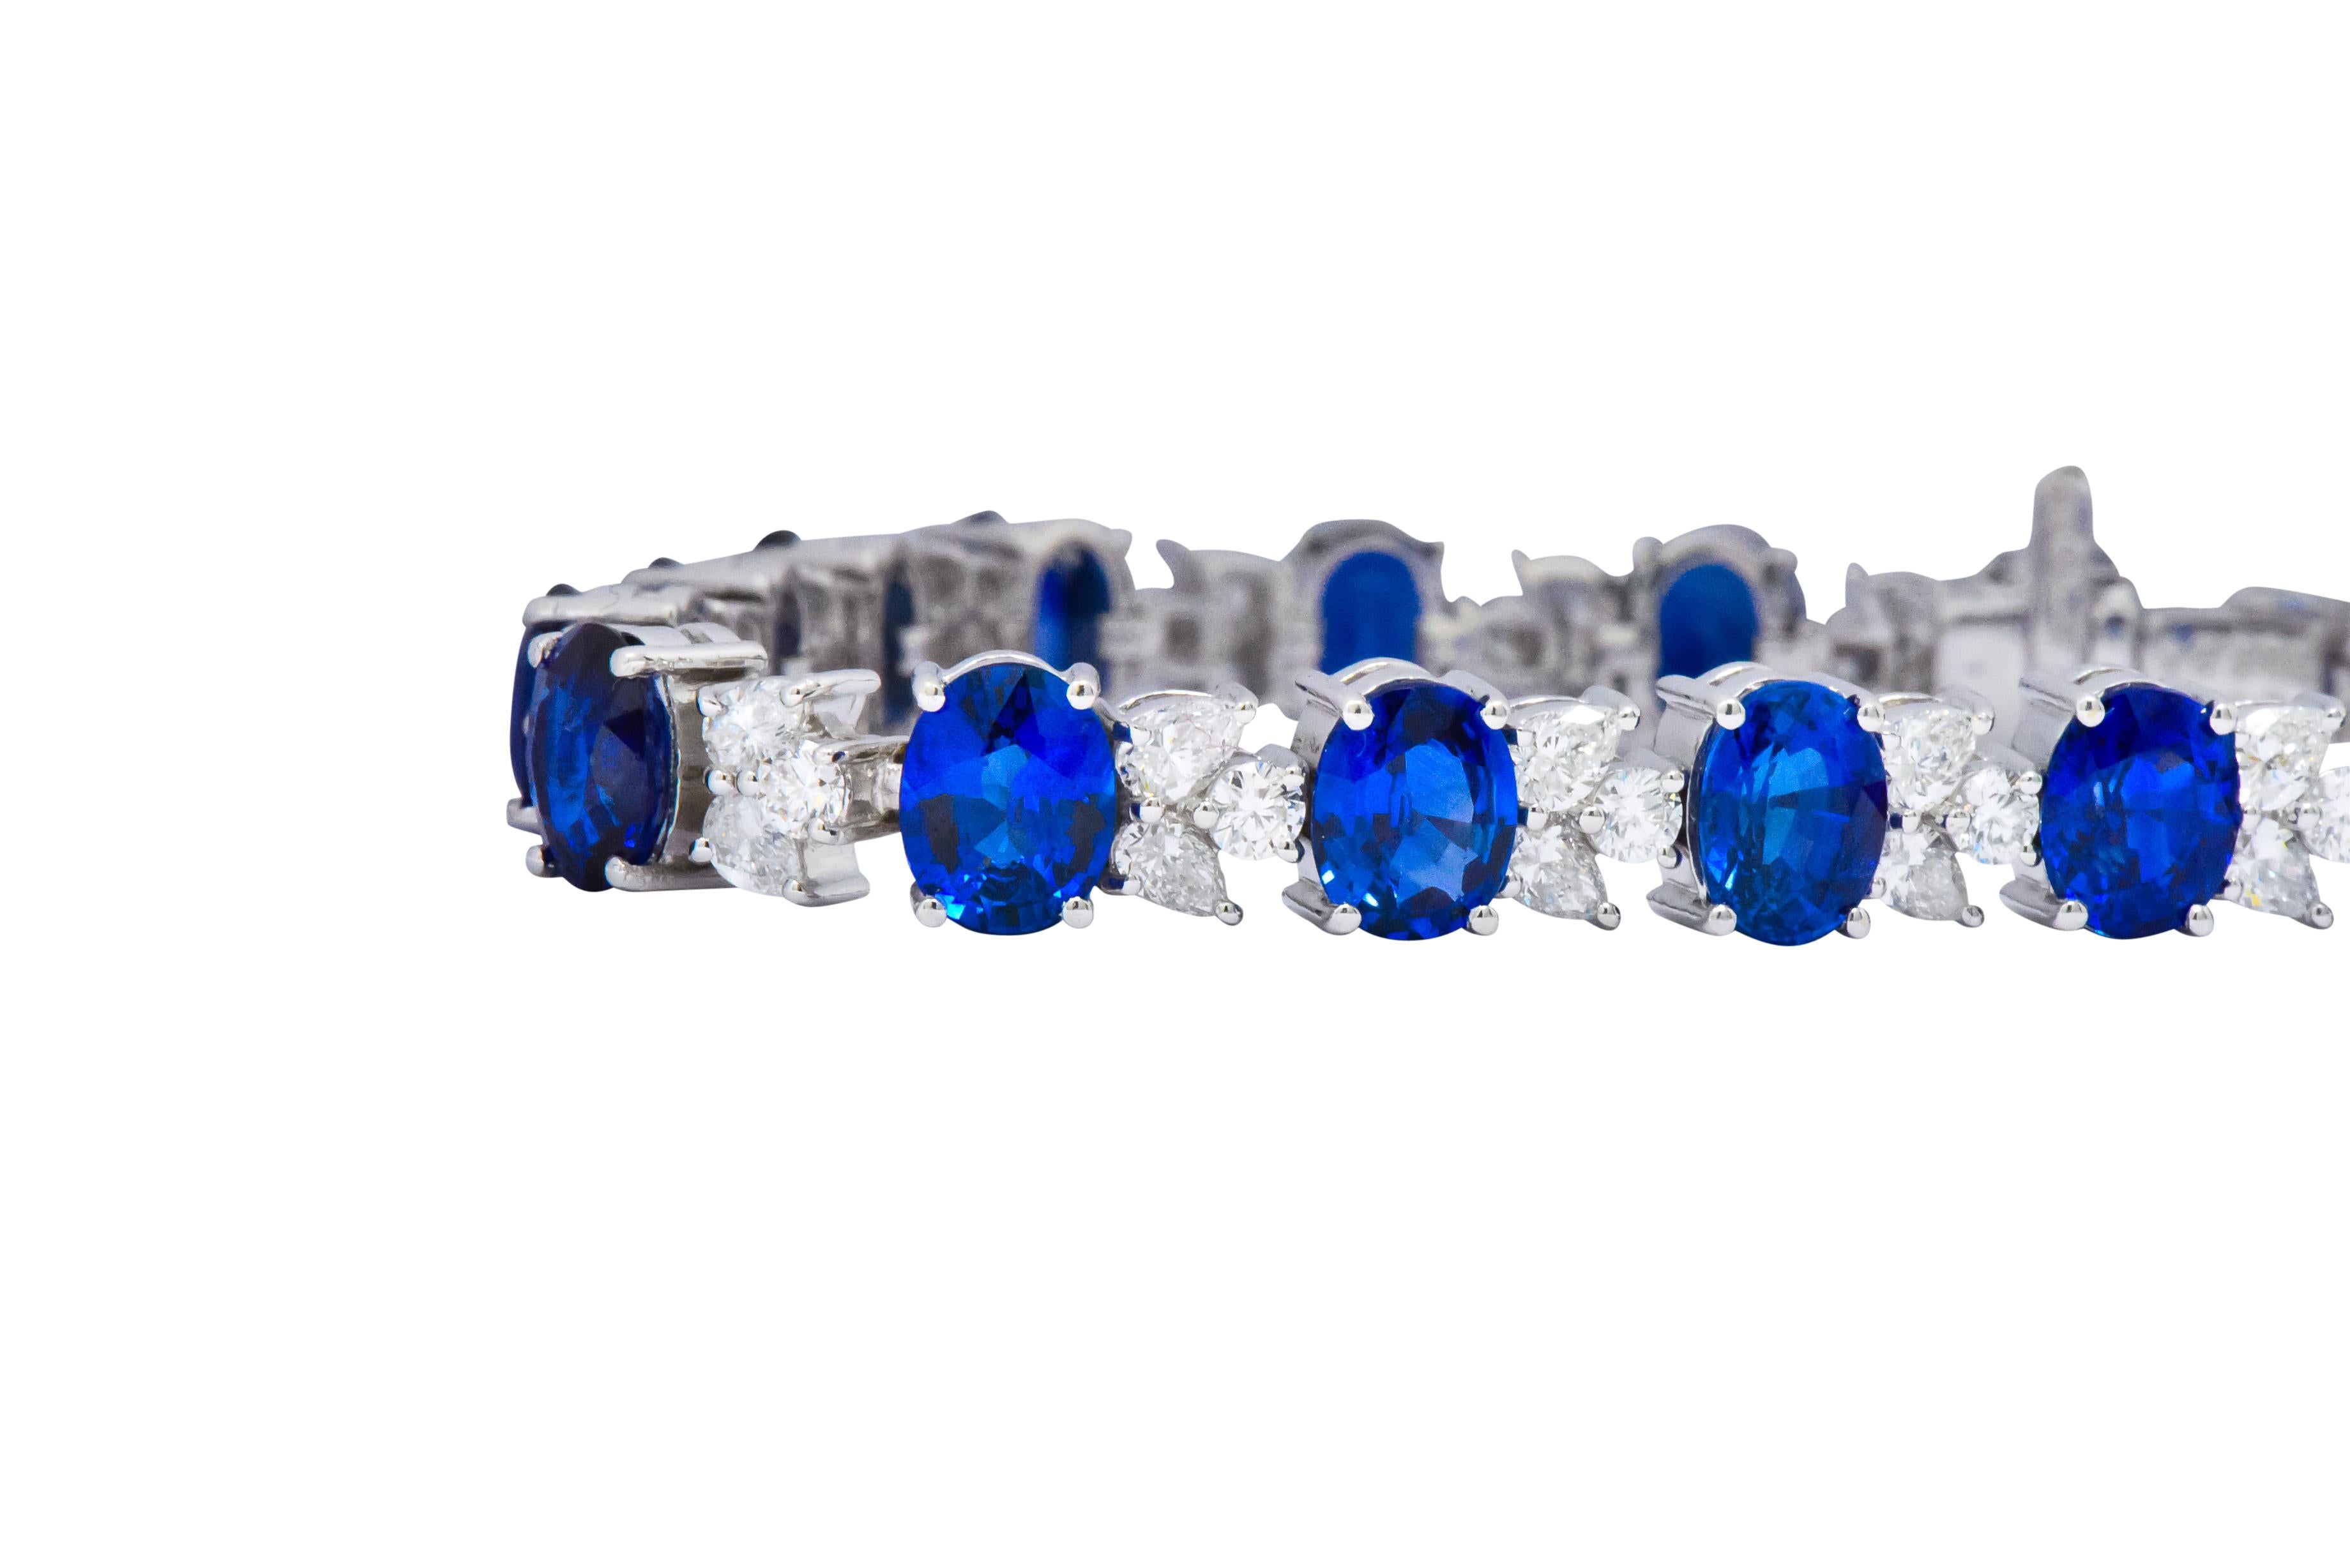 Set with 17 oval cut sapphires weighing 22.82 carats total, rich. bright blue and well matched

Accented with 51 pear shaped and round brilliant cut diamonds weighing 4.38 carats total, G/H color and VS to SI clarity

The mix of pear and round cut